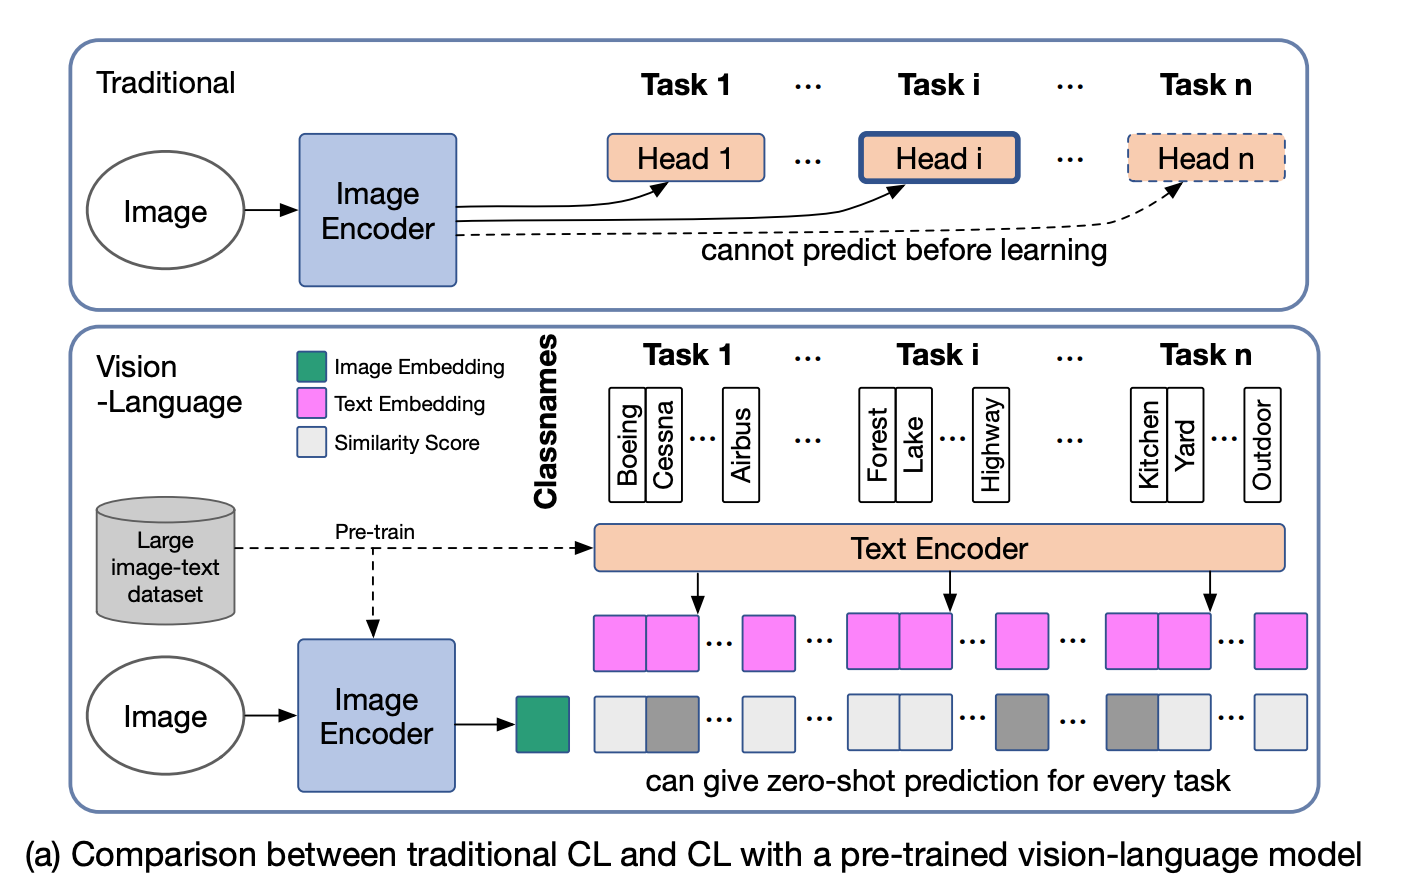 Comparison between traditional CL and CL with a pre-trained vision-language model